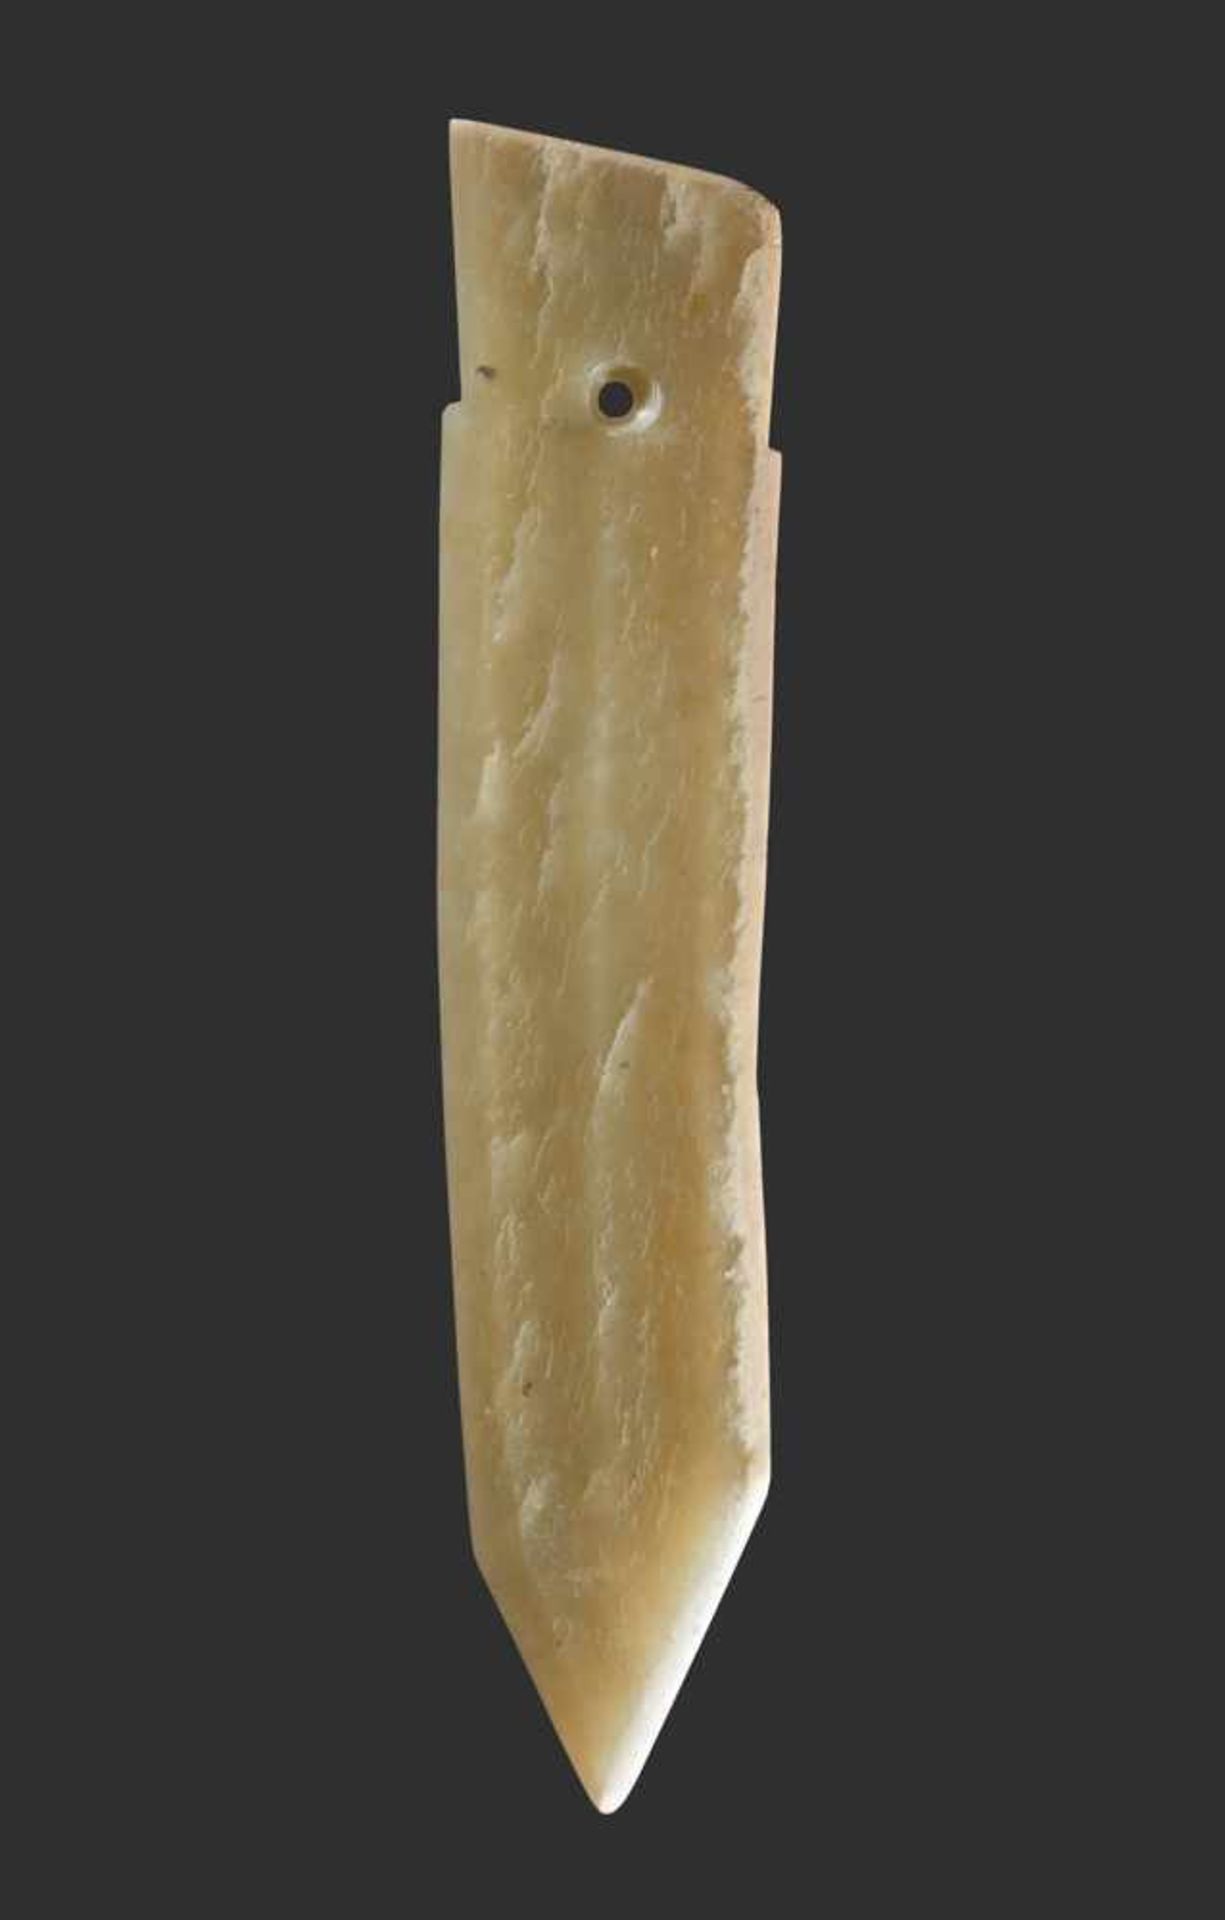 A FINELY CARVED SMALL GE DAGGER-AXE IN YELLOWISH JADE WITH DELICATE GROOVES Jade. China, Late Shang,